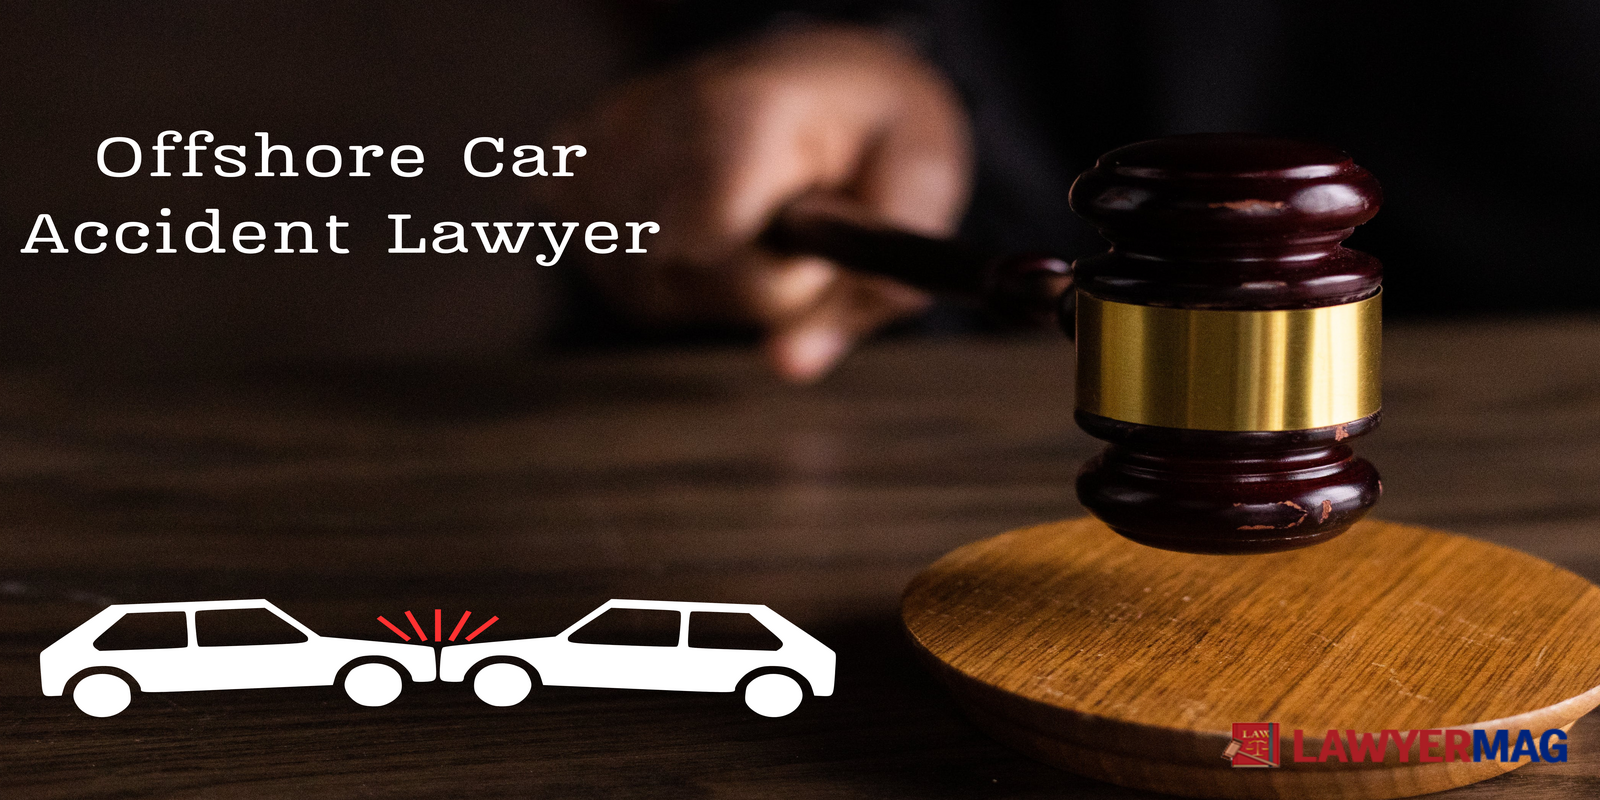 offshore car accident lawyer